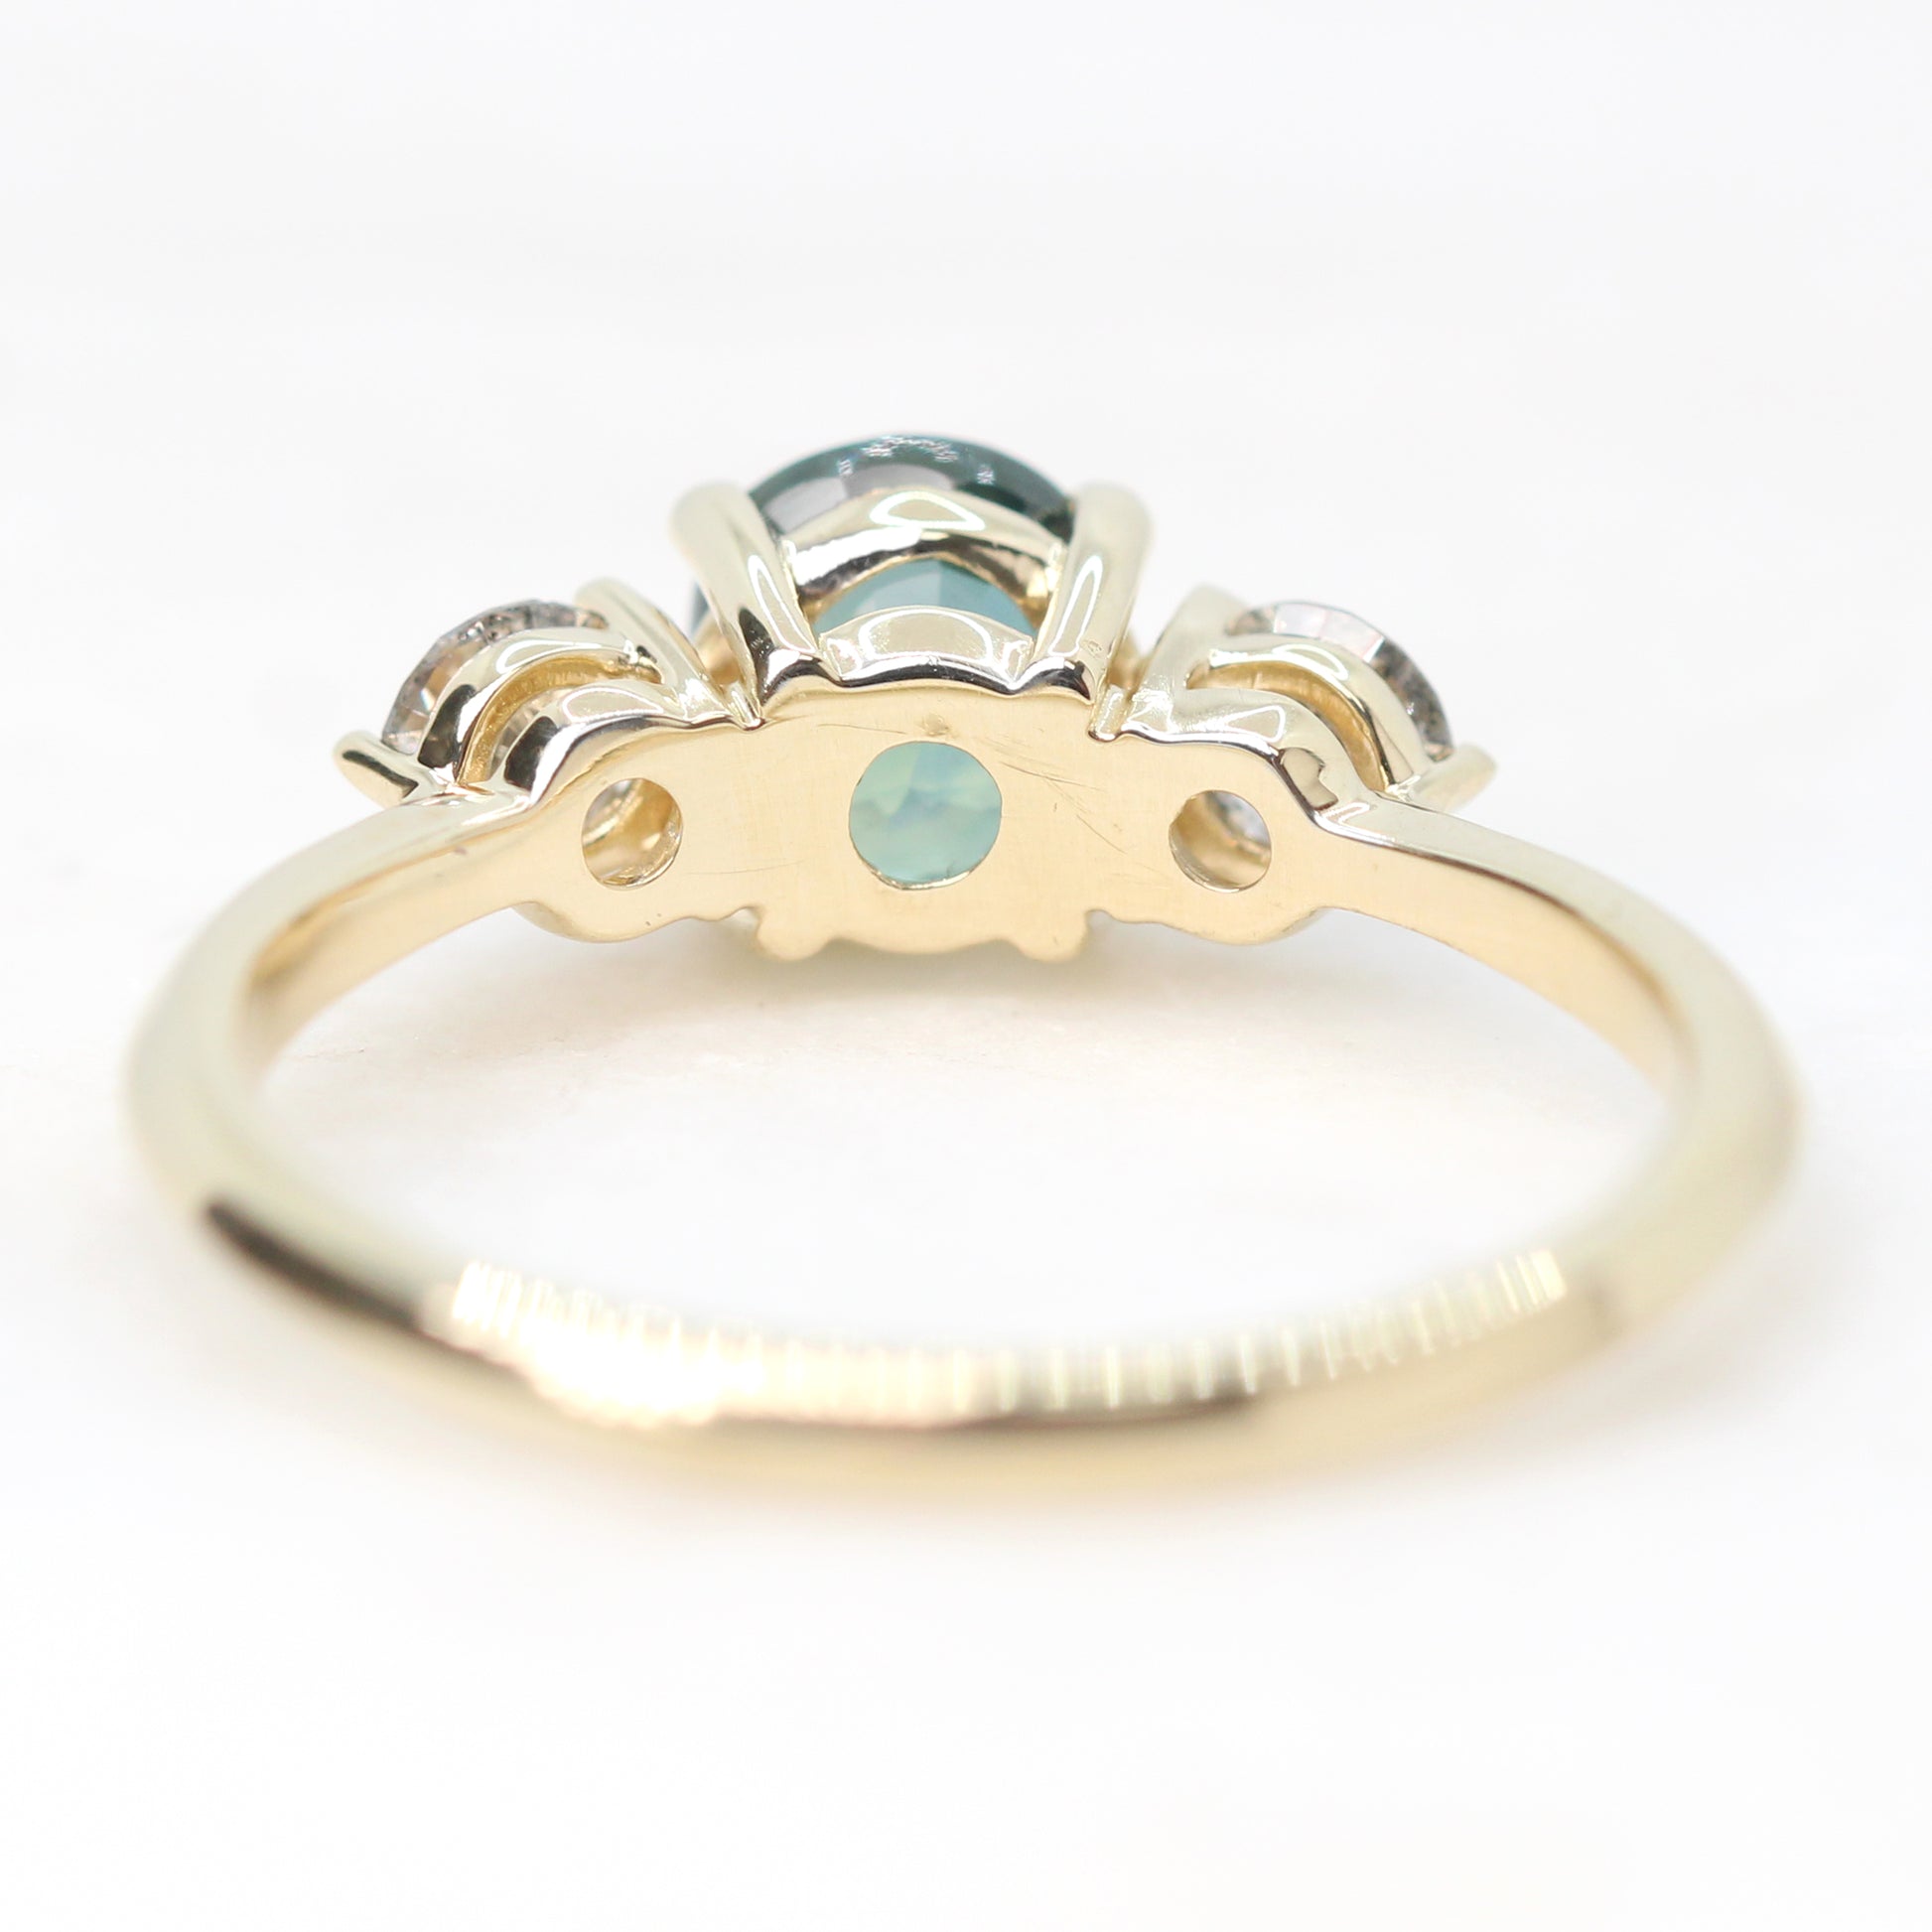 Olive Ring with a 1.34 Carat Teal Oval Madagascar Sapphire and Salt and Pepper Accent Diamonds in 14k Yellow Gold - Ready to Size and Ship - Midwinter Co. Alternative Bridal Rings and Modern Fine Jewelry